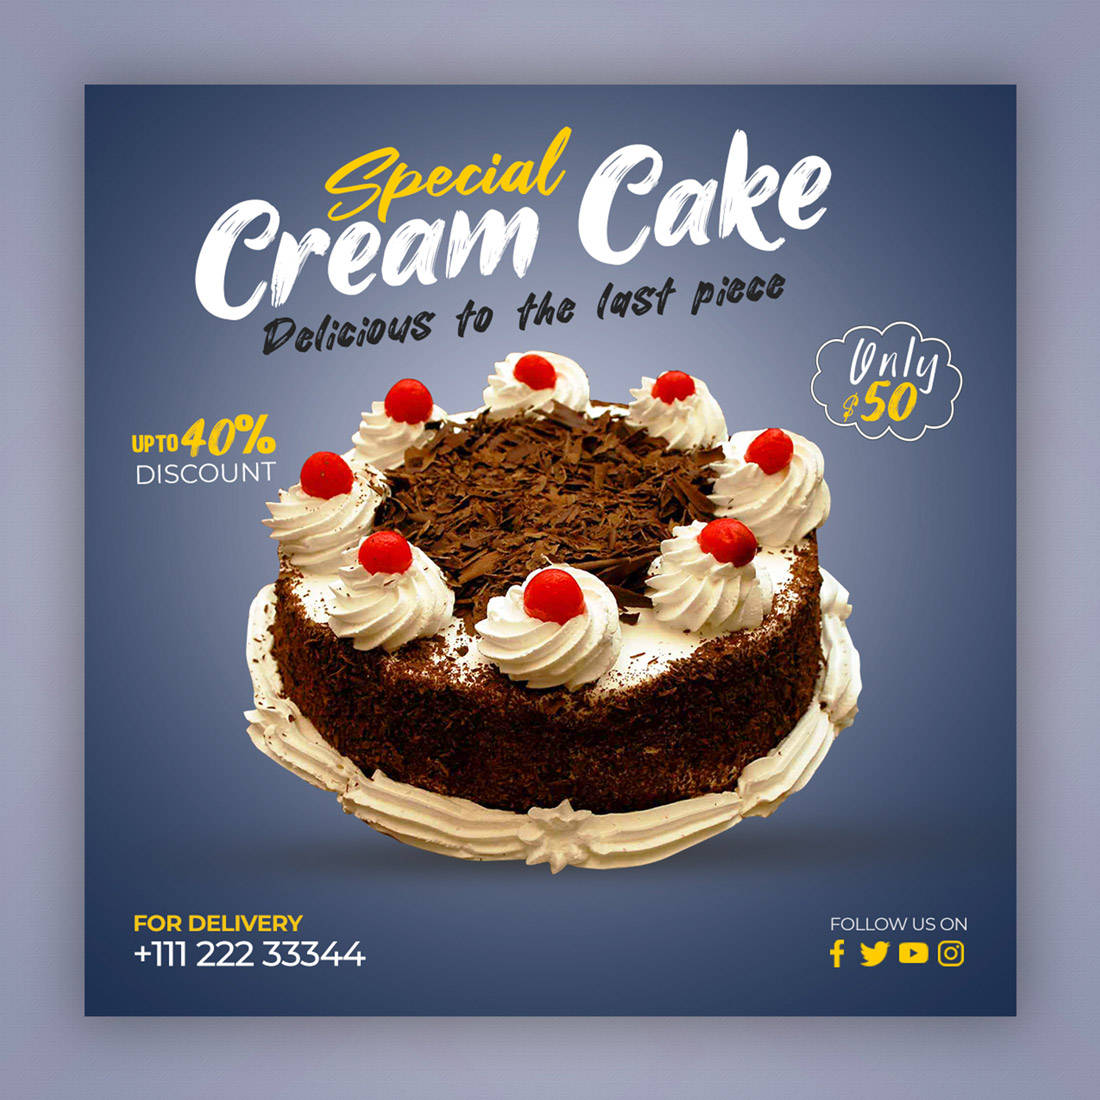 Half price cake discount poster template image_picture free download  400200256_lovepik.com